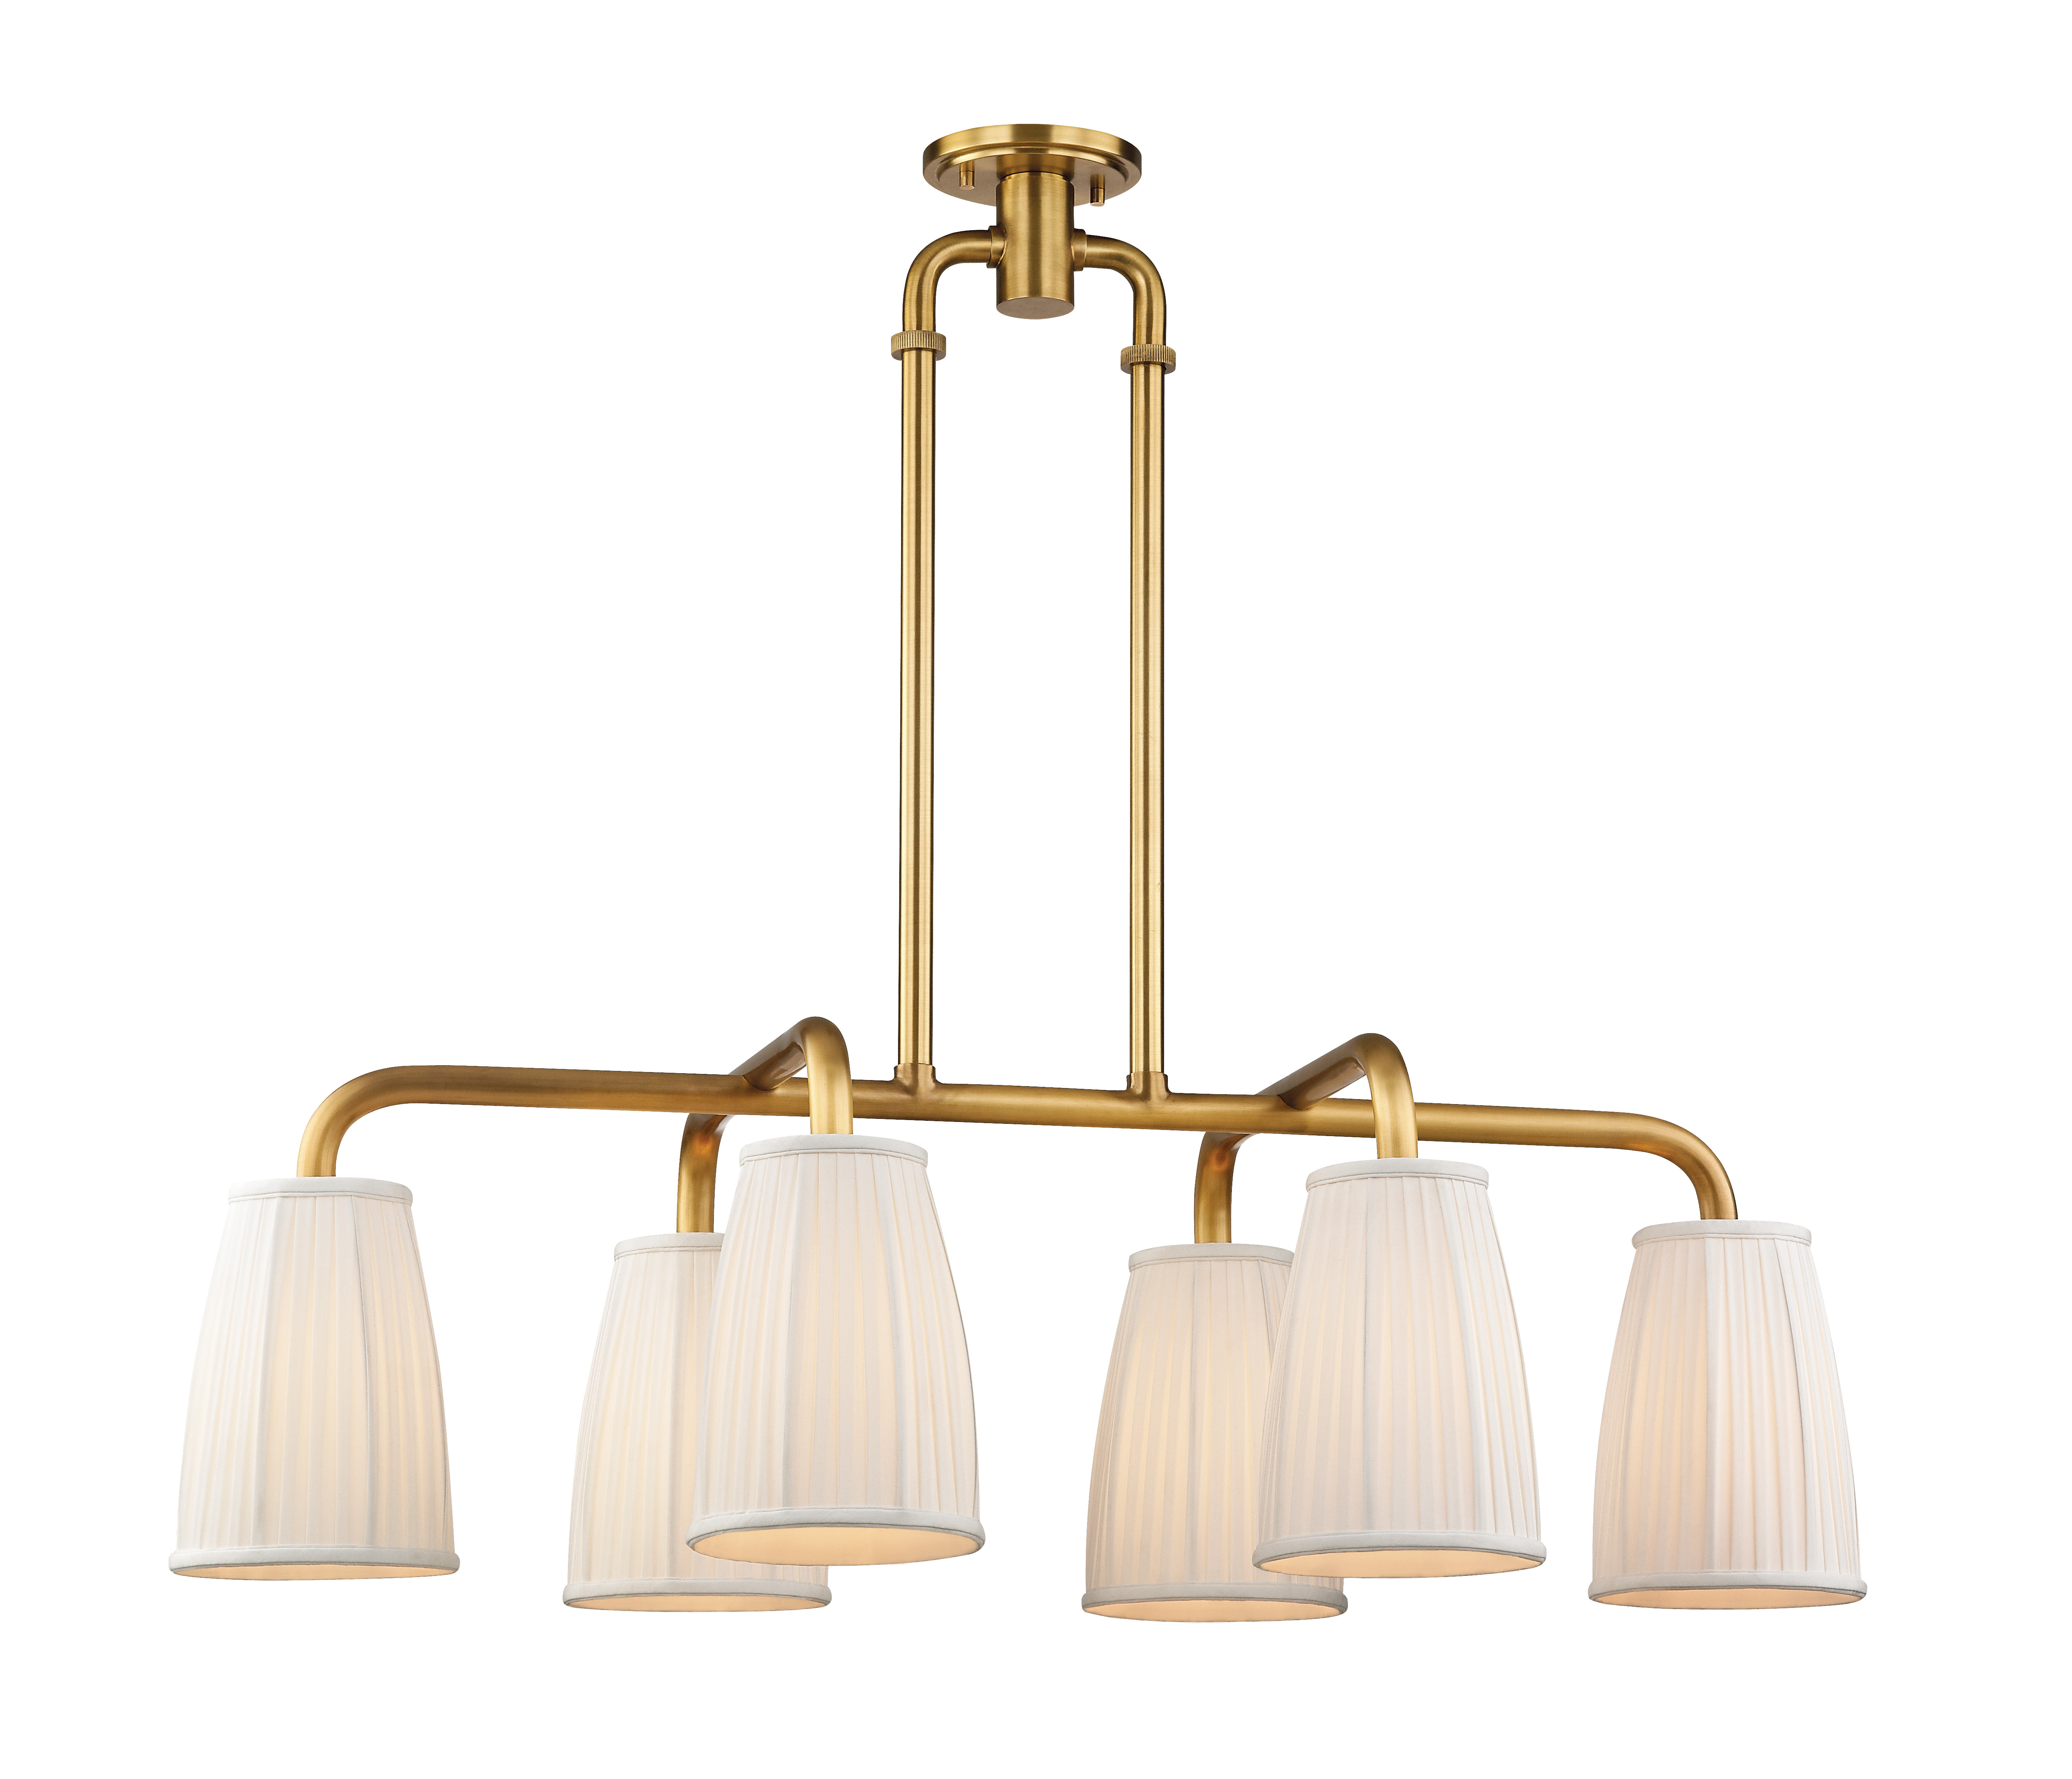 Malden by Hudson Valley Lighting - Malden is all about the shade and the shape. The shades are large with a unique, gentle curve. Their delicate pleats contrast with weighty tubing for the rest of the